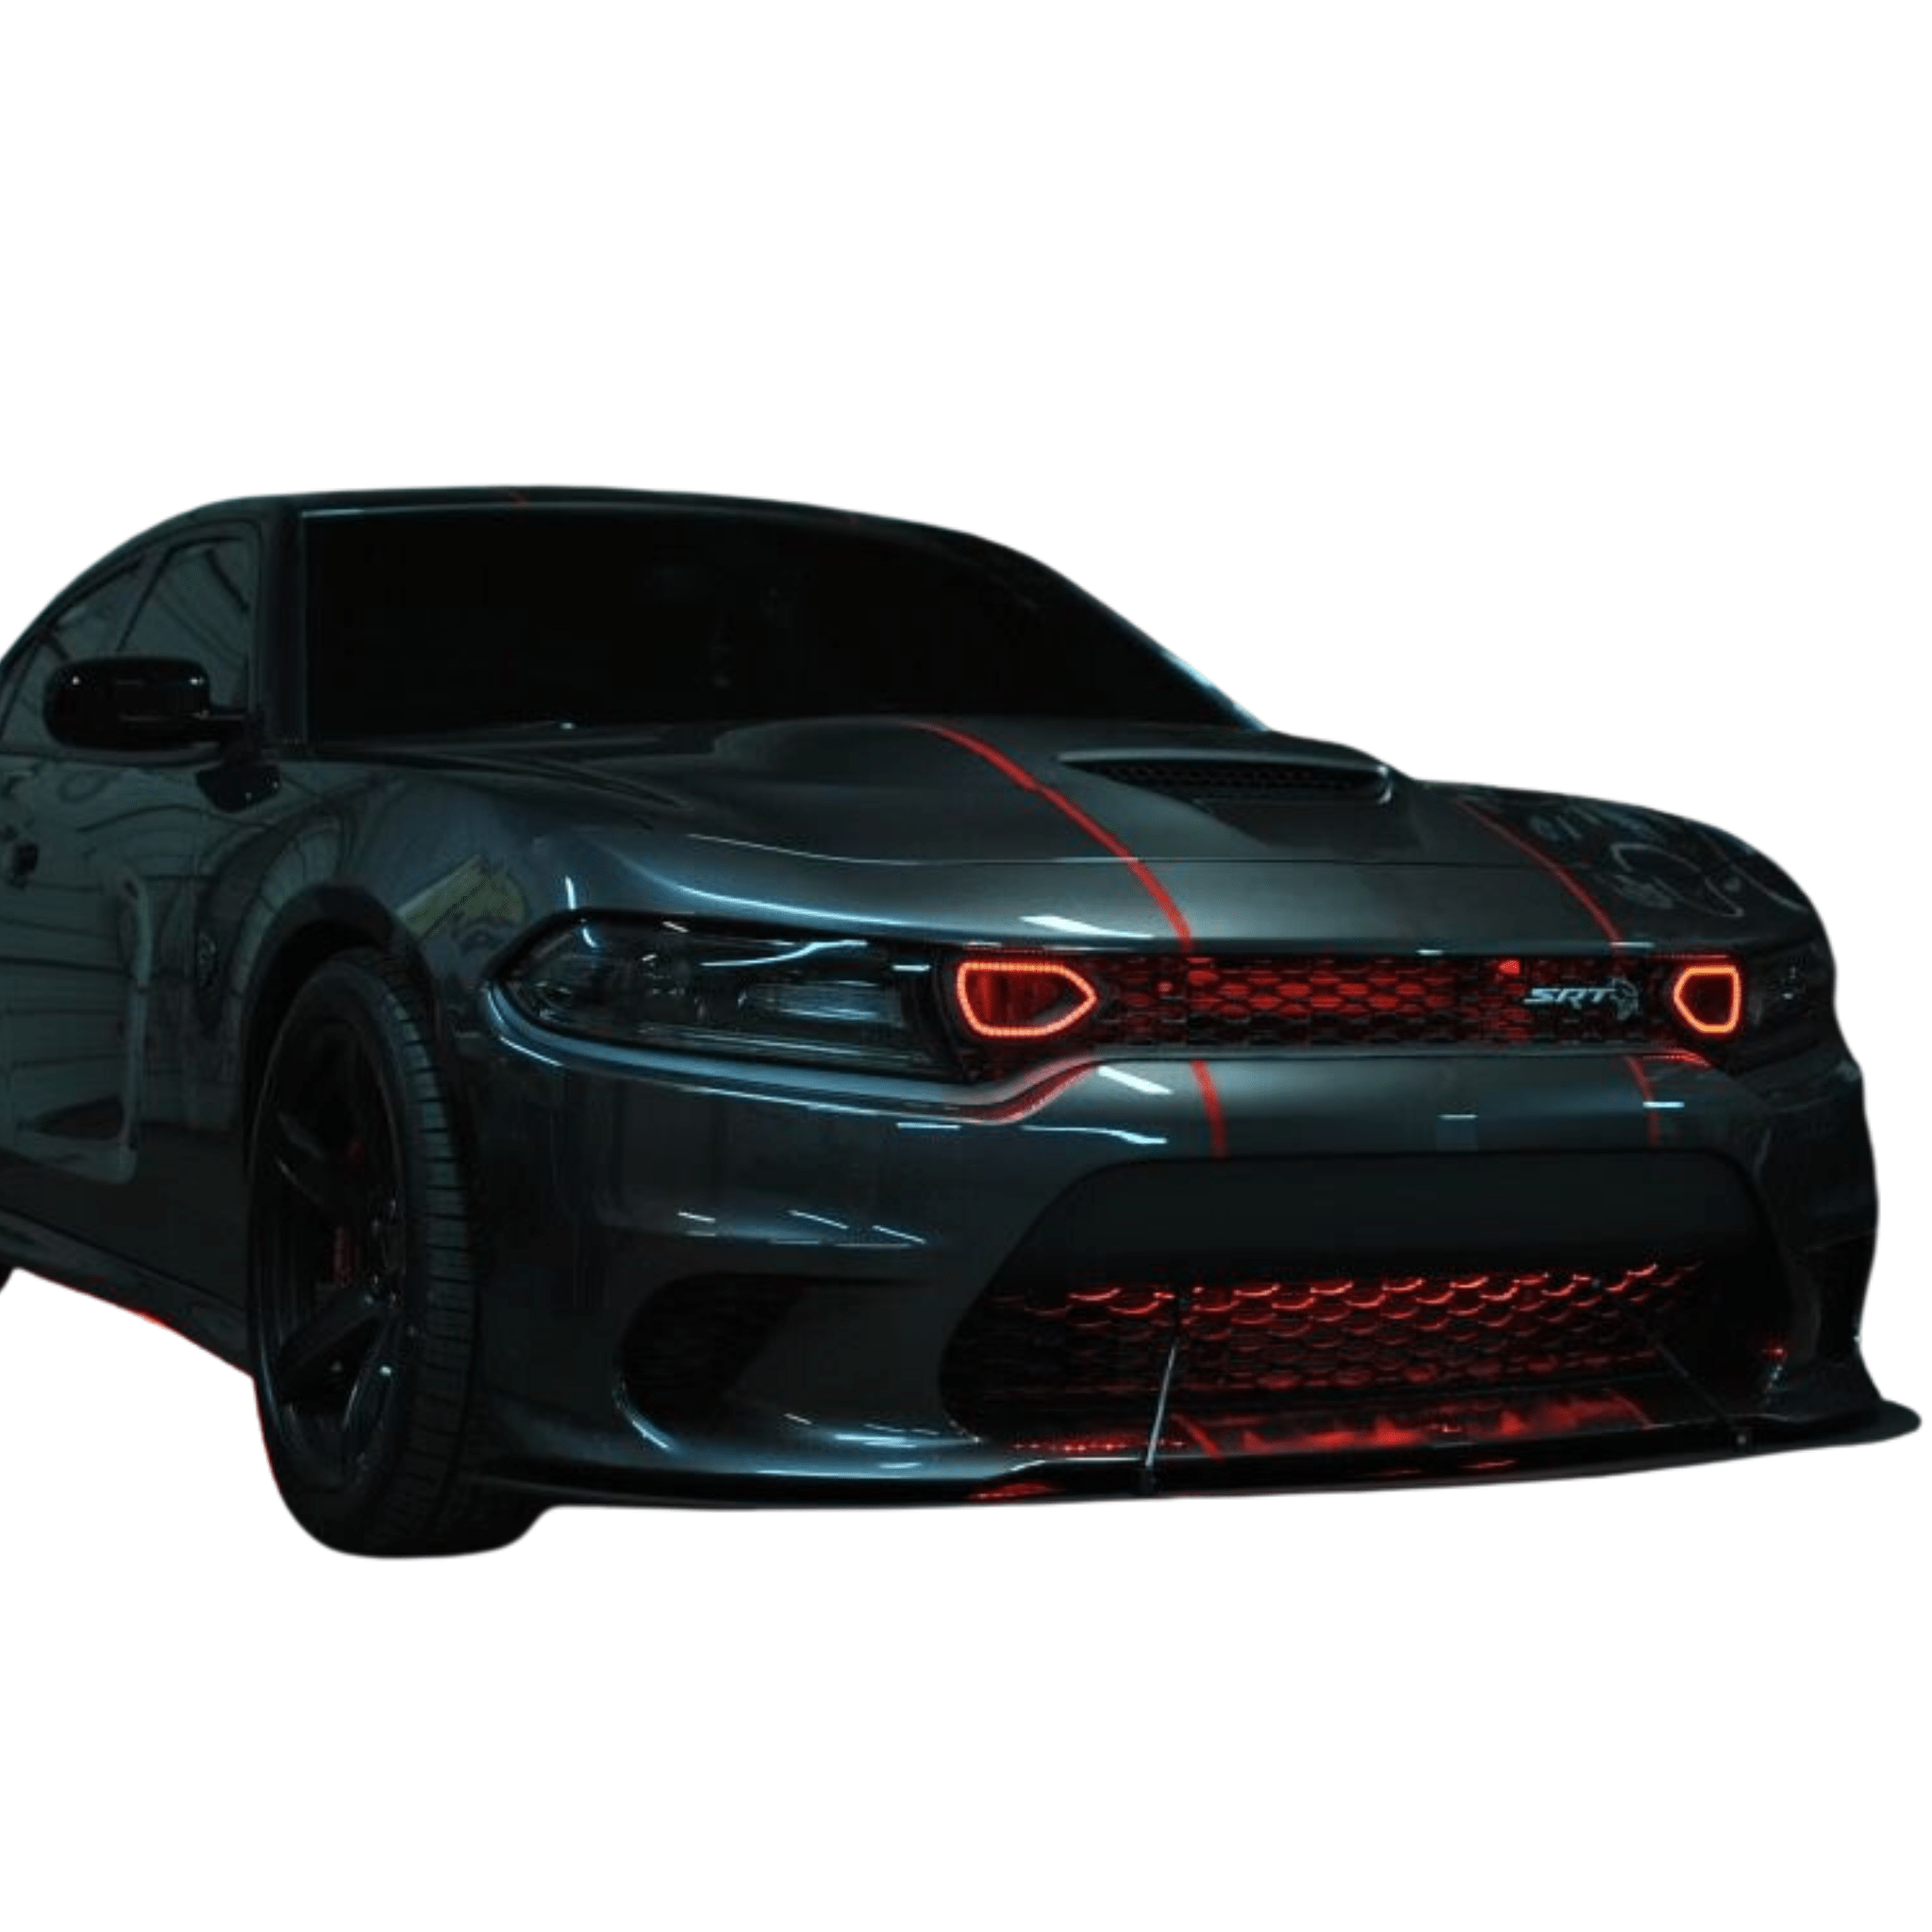 2019+ Dodge Charger Snorkel Air Intake Multicolor Halo Kit - RGB Halo Kits Multicolor Flow Series Color Chasing RGBWA LED headlight kit Oracle Lighting Trendz OneUpLighting Morimoto theretrofitsource AutoLEDTech Diode Dynamics